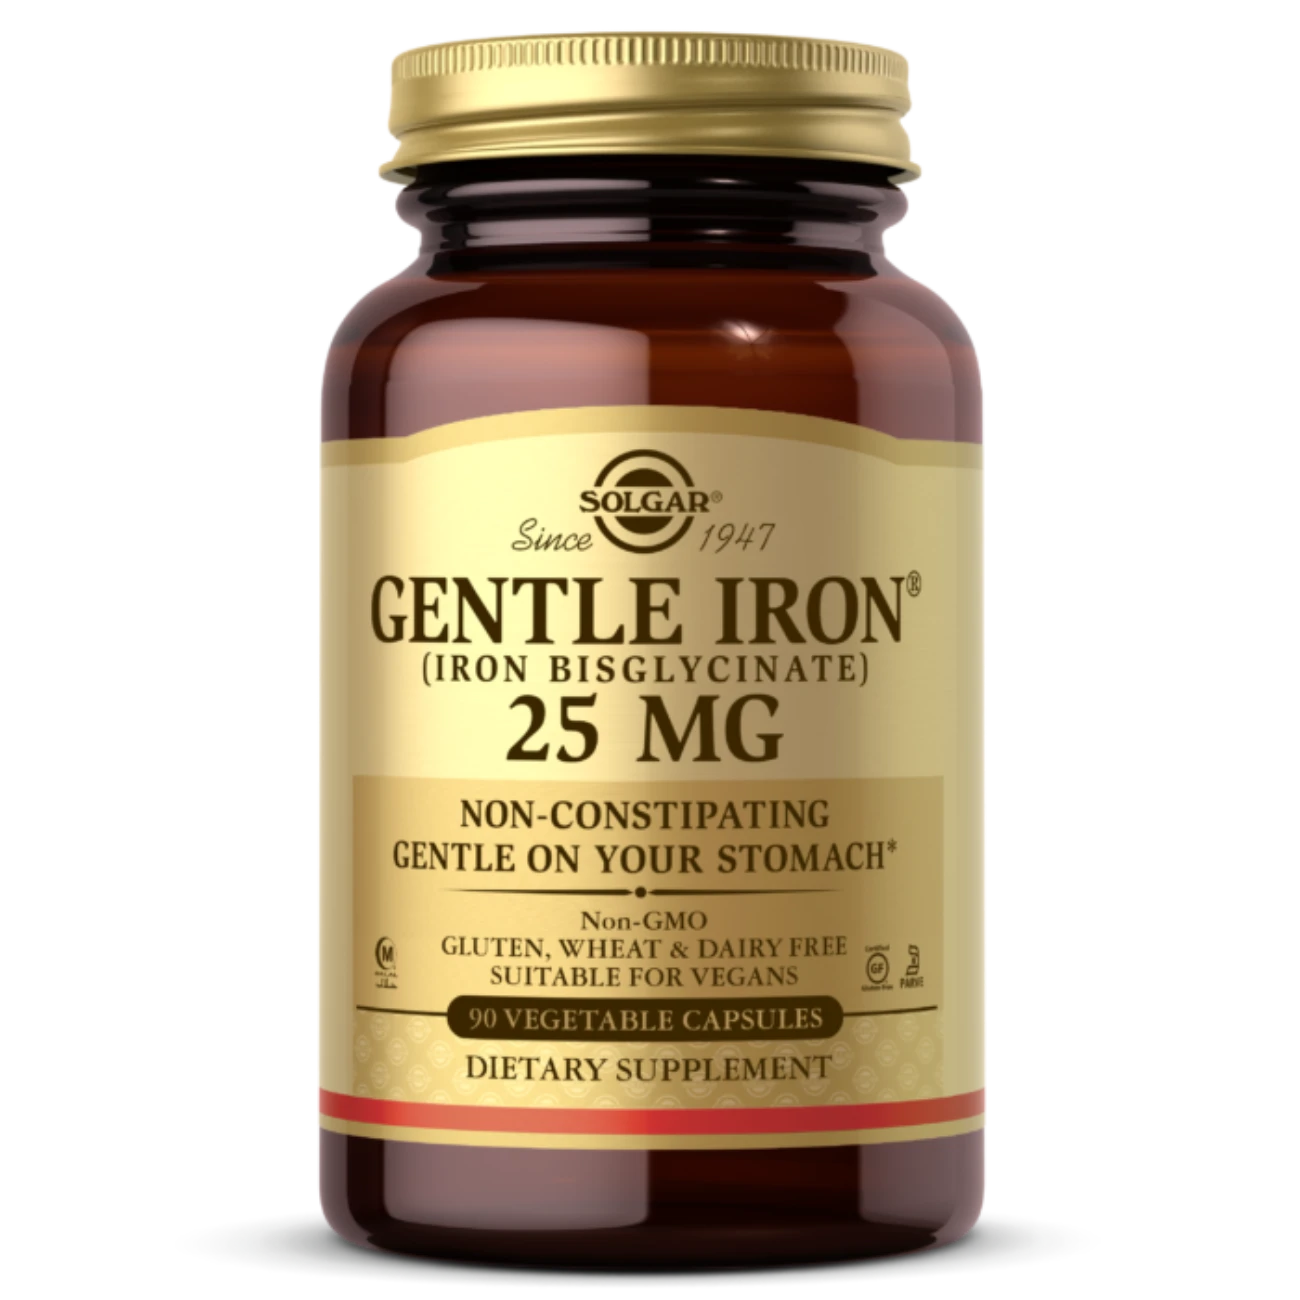 Gentle Iron (Iron Bisglycinate) 20 mg - 90 Vegetable Capsules